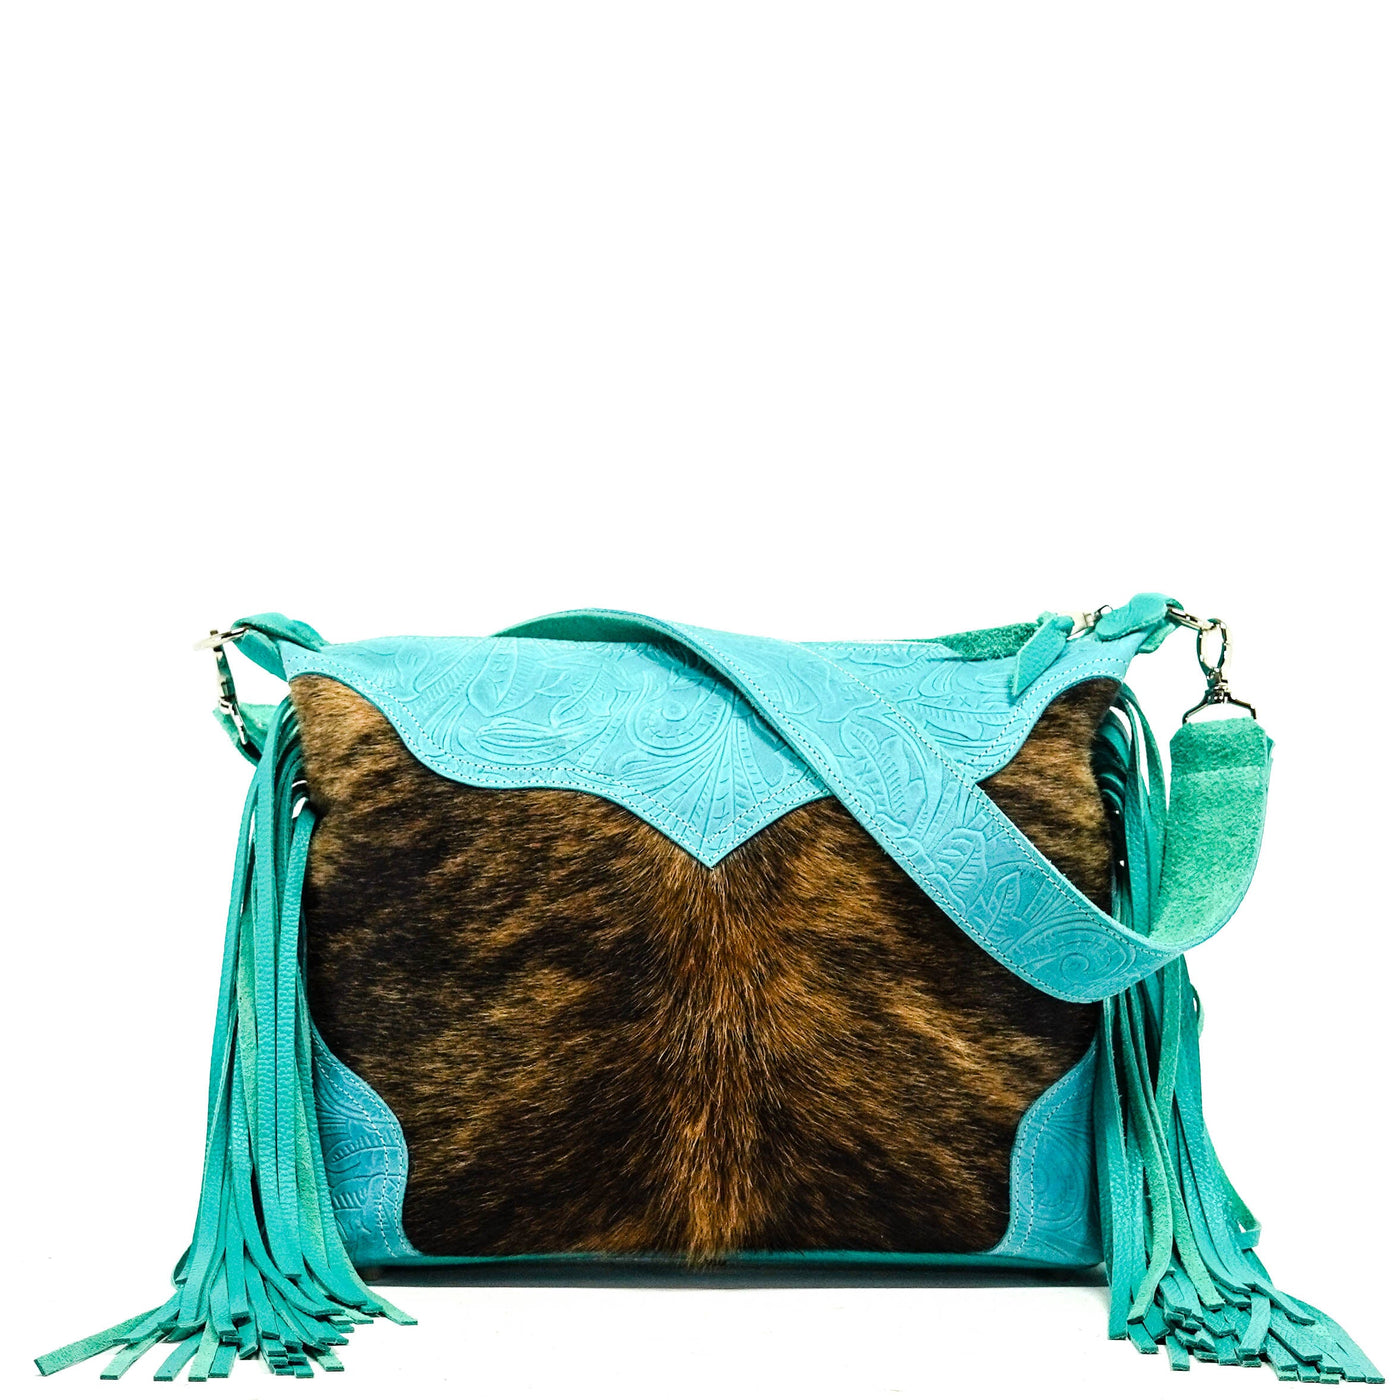 Oakley - Centered Brindle w/ Turquoise Denver Tool-Oakley-Western-Cowhide-Bags-Handmade-Products-Gifts-Dancing Cactus Designs